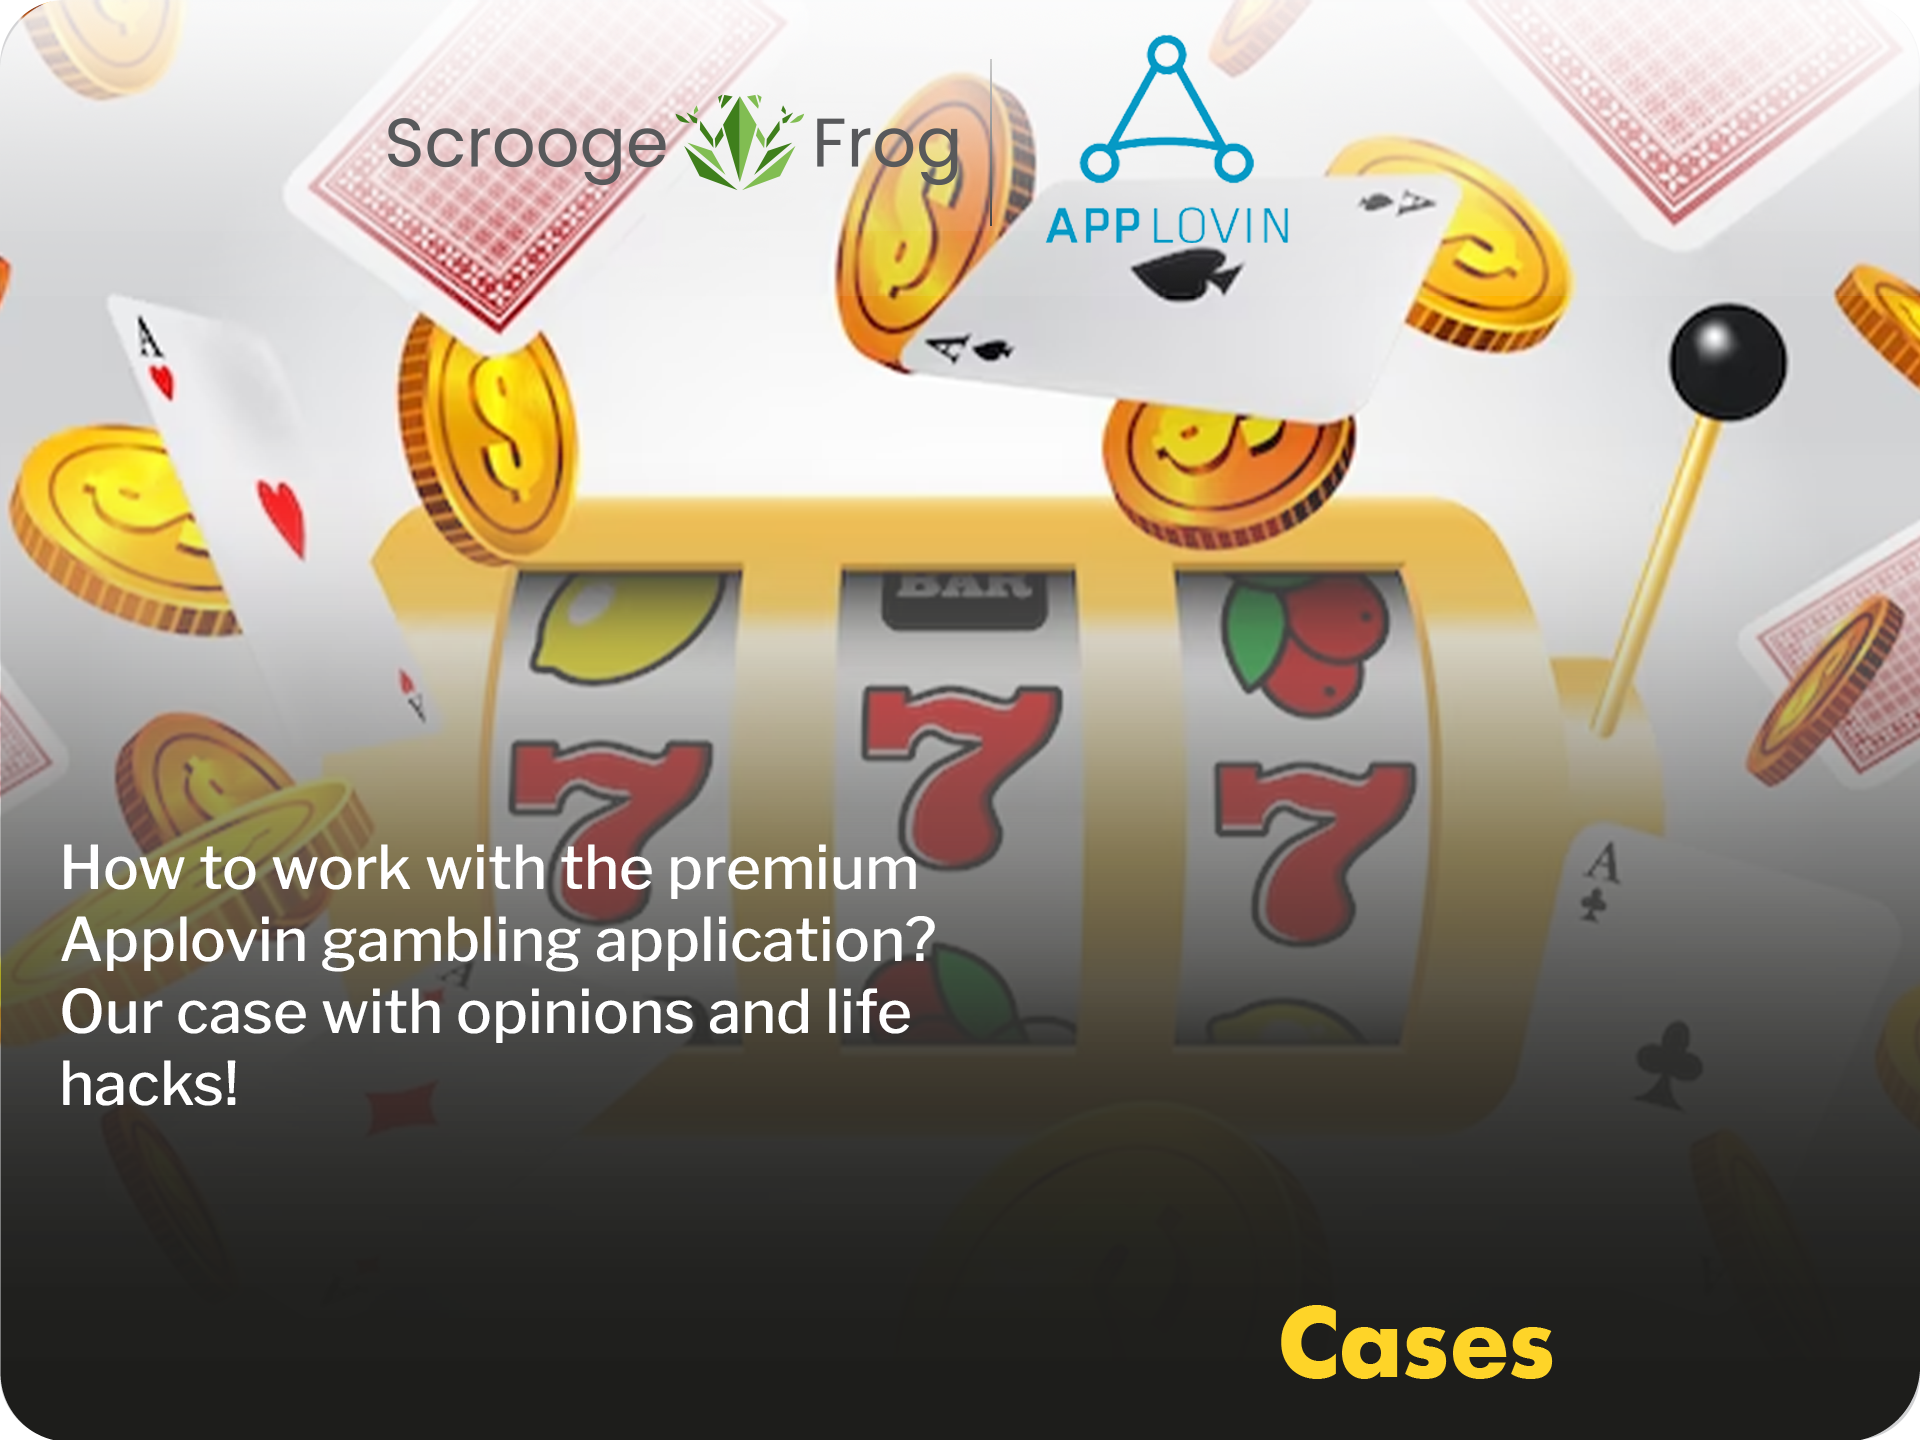 How to work with the premium Applovin gambling application? Our case with opinions and life hacks!